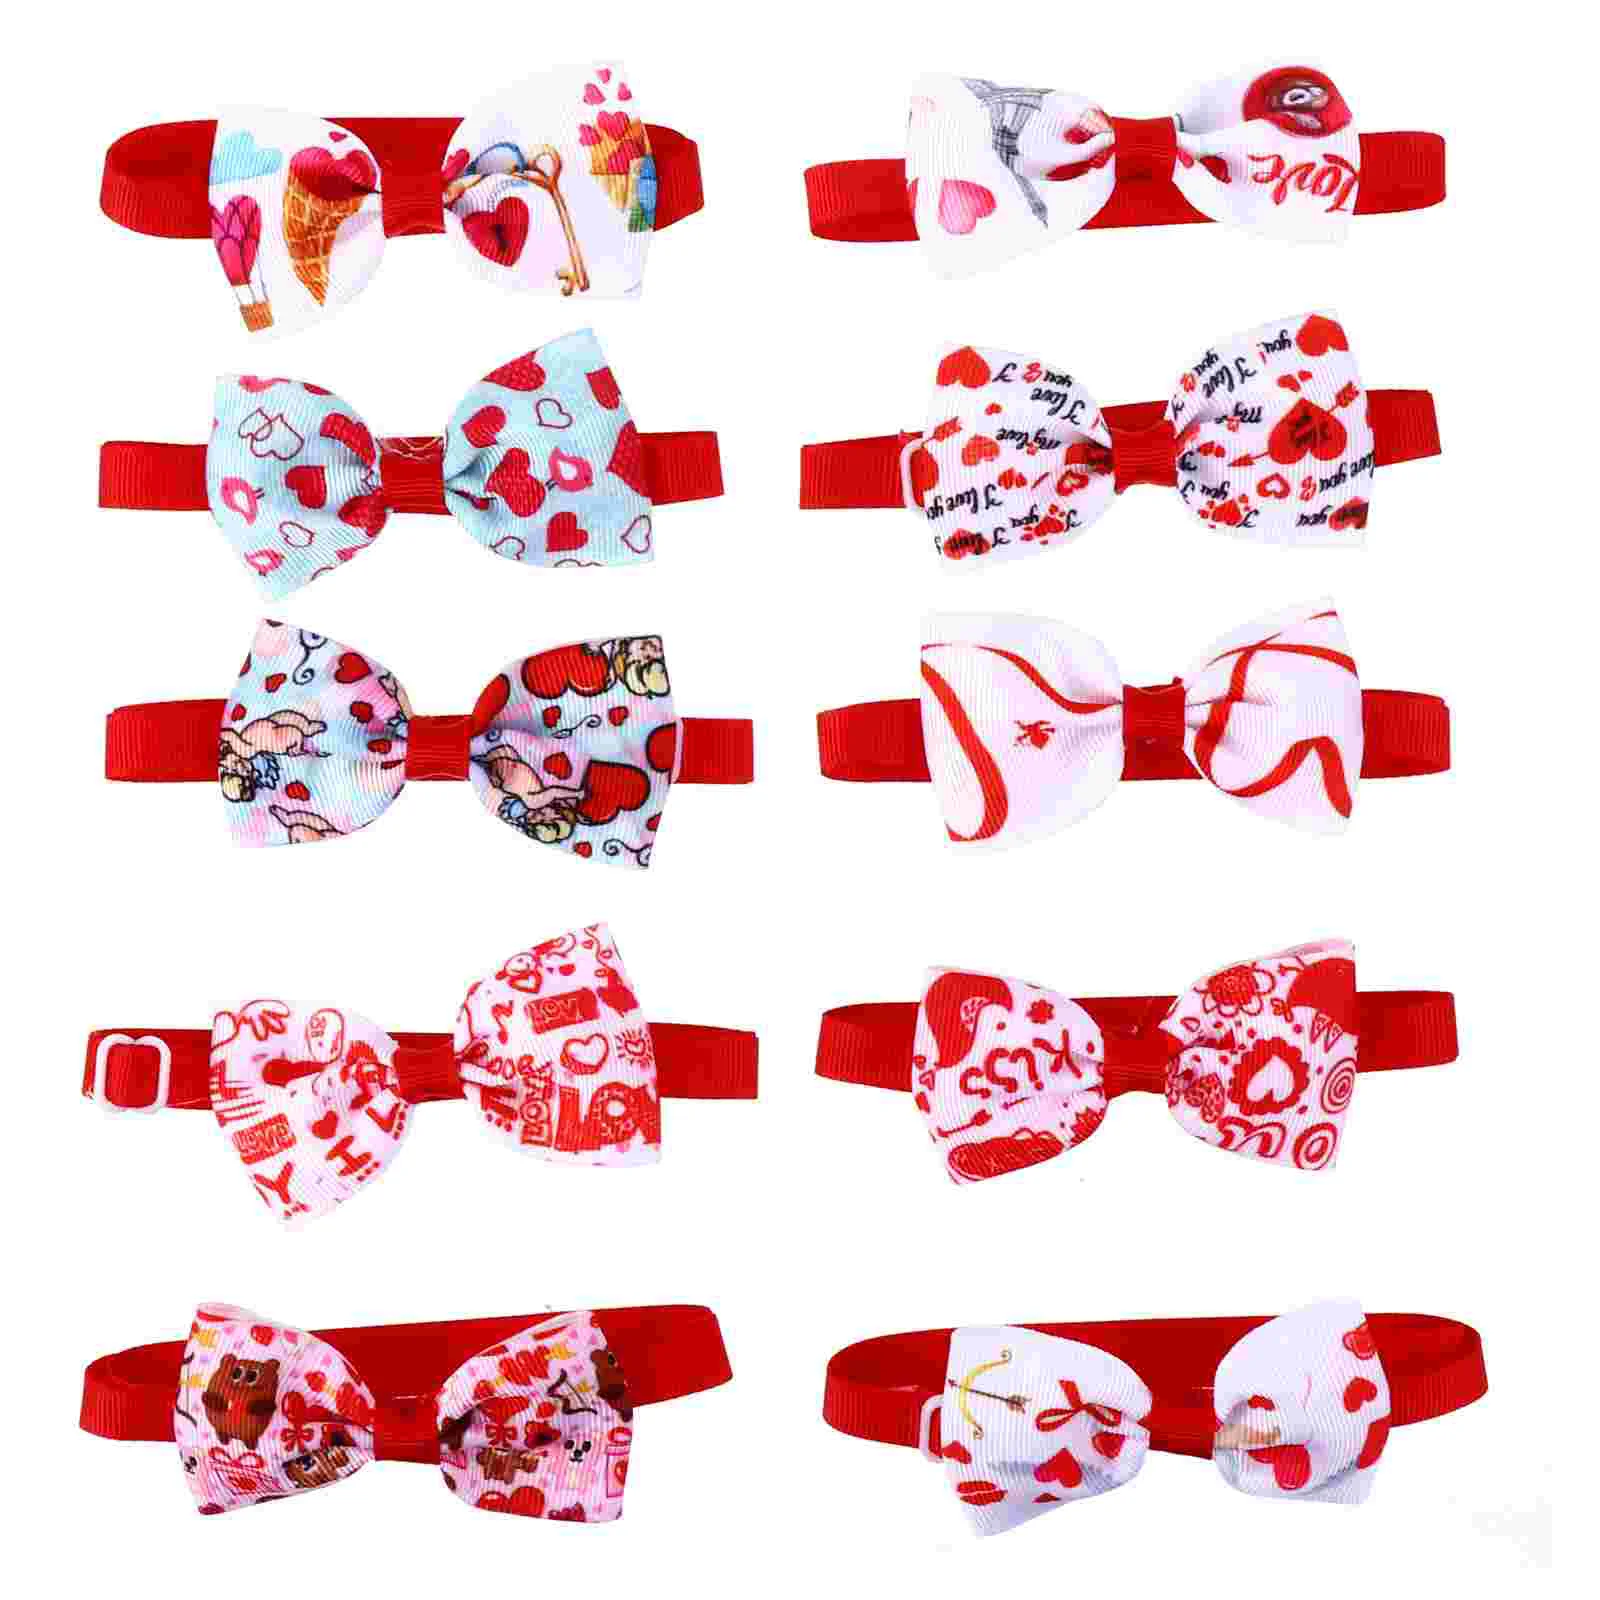 

Collar Pet Cat Dog Tie Bowchristmas Collars Outfit Puppy Necklace Holiday Pendant S Bells Detachable Supplies Day Valentine Ties